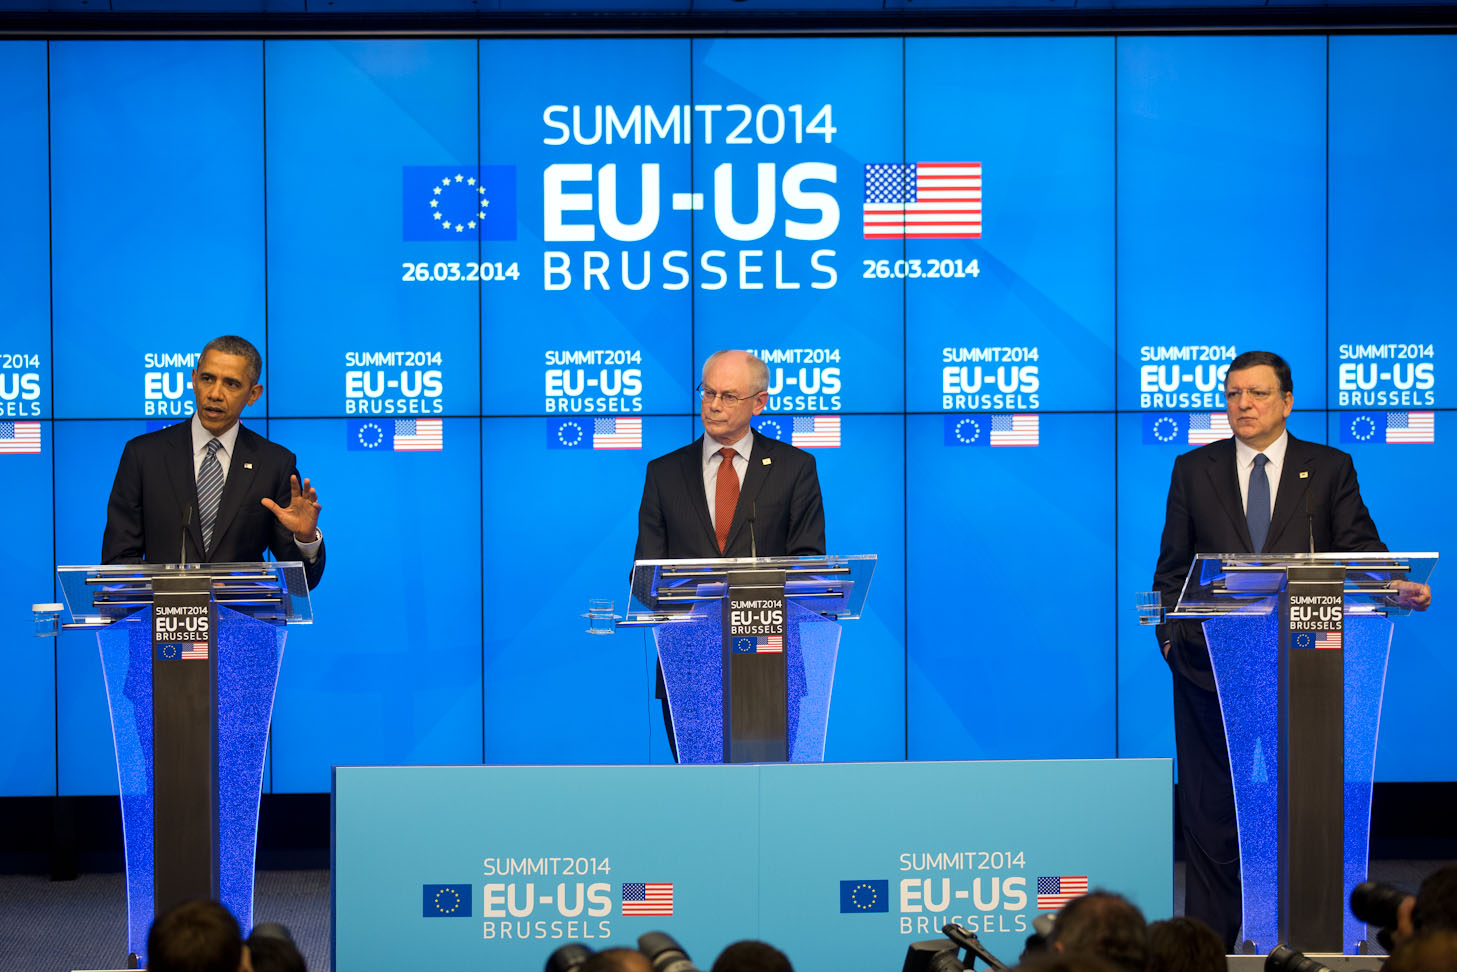 President Barack Obama, European Council President Herman Van Rompuy, and European Commission President José Manuel Barroso hold a press conference during the EU-U.S. Summit at the Council of the European Union in Brussels, Belgium, March 26, 2014. 